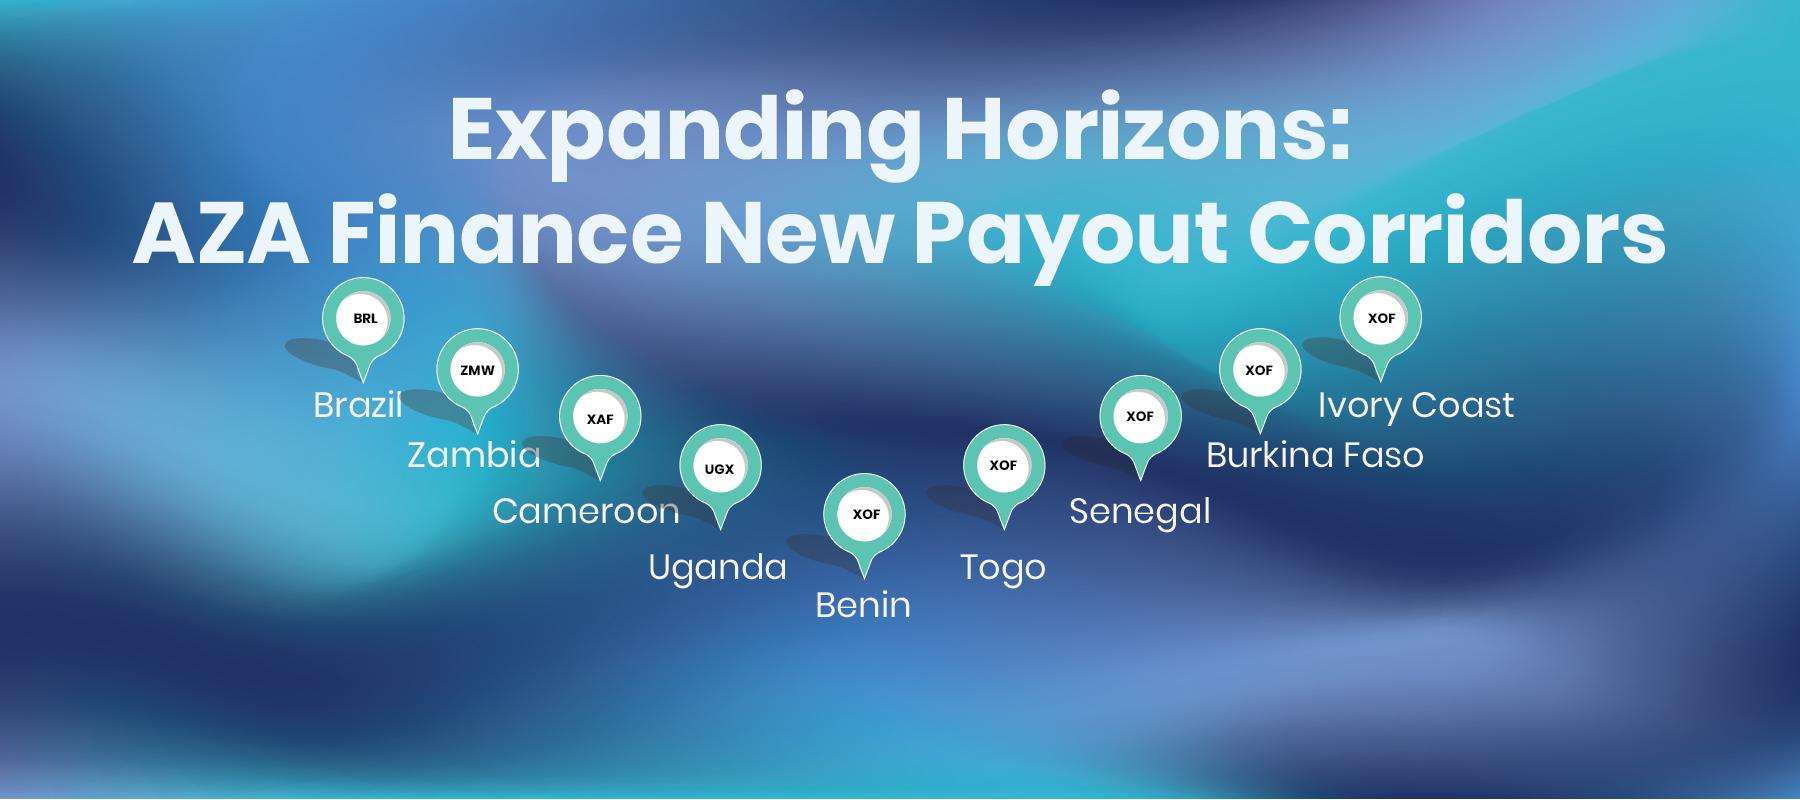 AZA Finance Launches New Payout Corridors to Empower Businesses in Emerging Markets